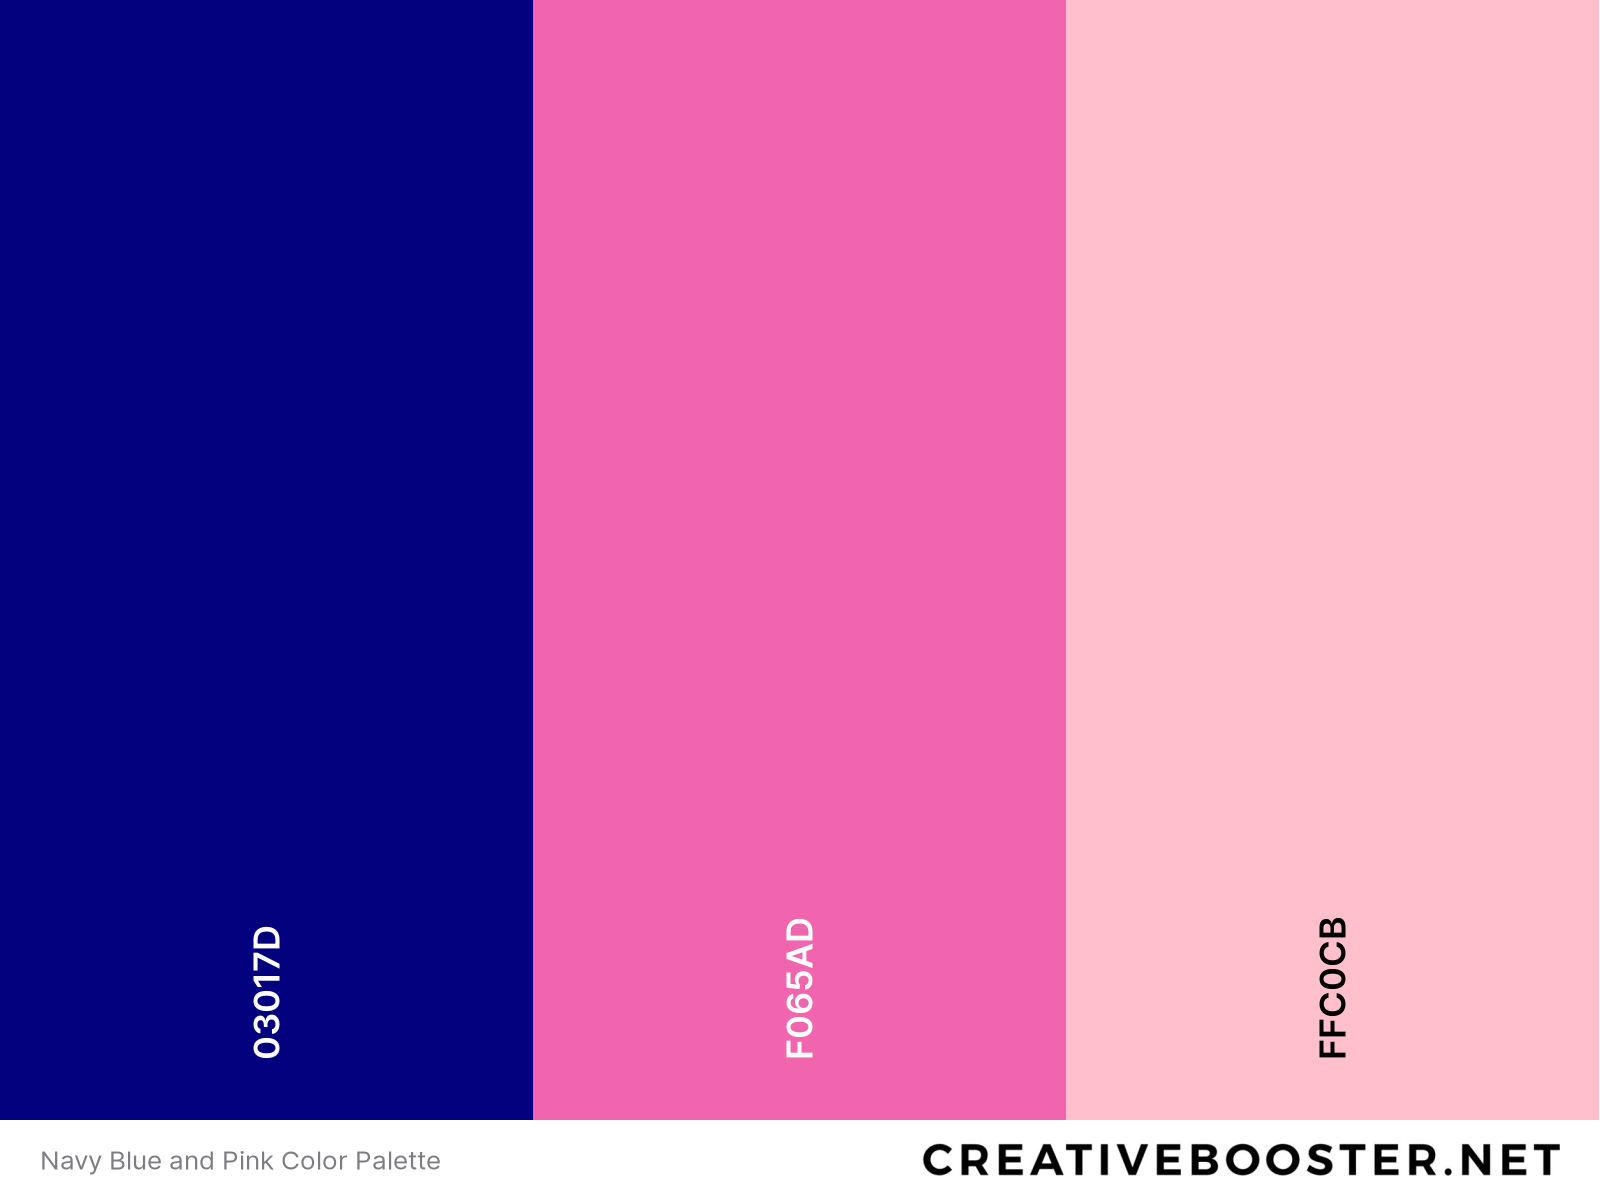 Navy Blue and Pink Color Palette